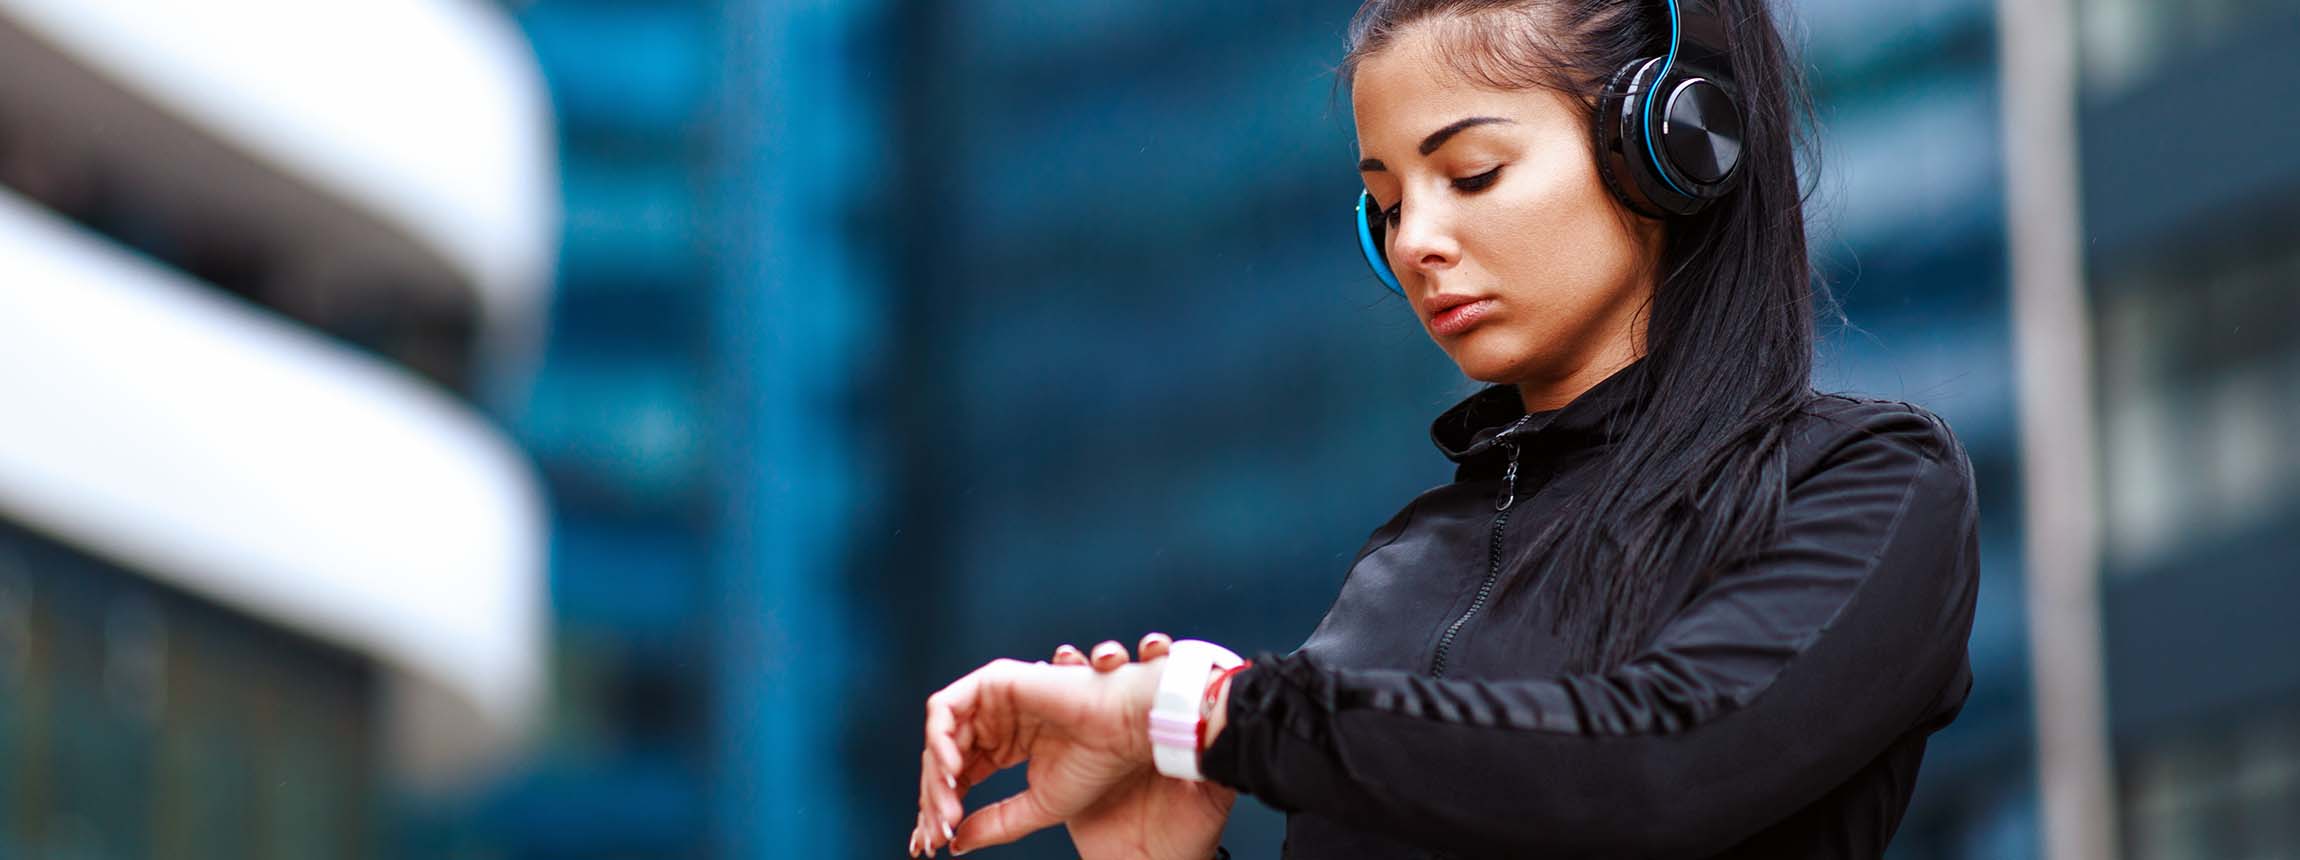 Young woman checking time at smartwatch after jogging in the city